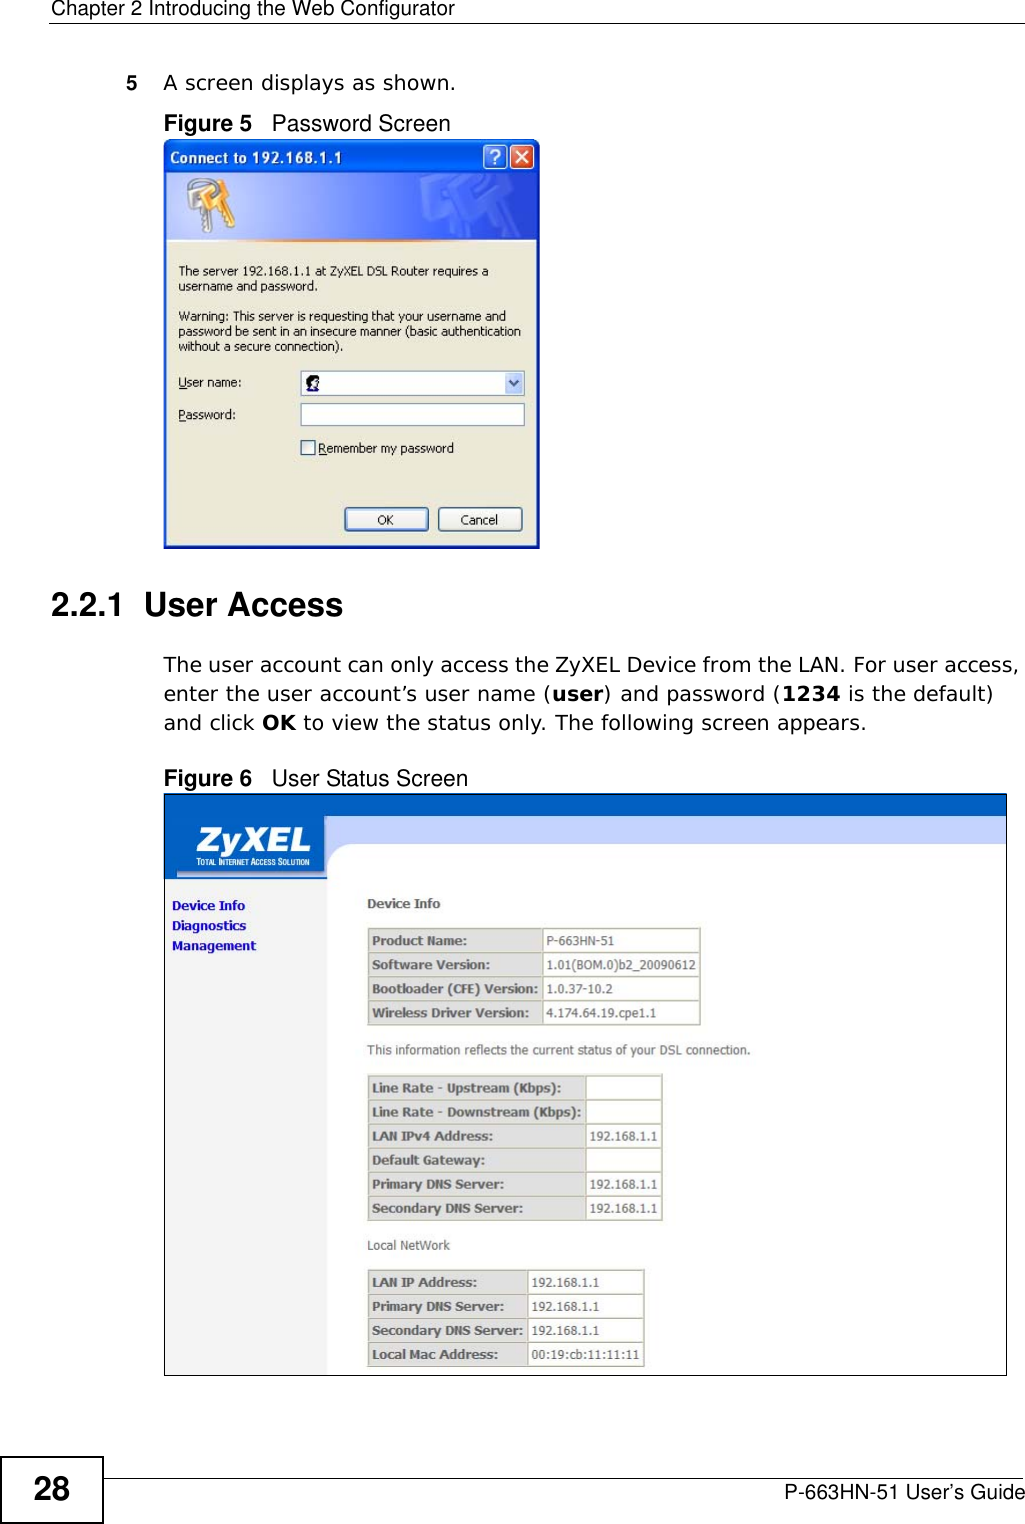 Chapter 2 Introducing the Web ConfiguratorP-663HN-51 User’s Guide285A screen displays as shown. Figure 5   Password Screen2.2.1  User AccessThe user account can only access the ZyXEL Device from the LAN. For user access, enter the user account’s user name (user) and password (1234 is the default) and click OK to view the status only. The following screen appears. Figure 6   User Status Screen